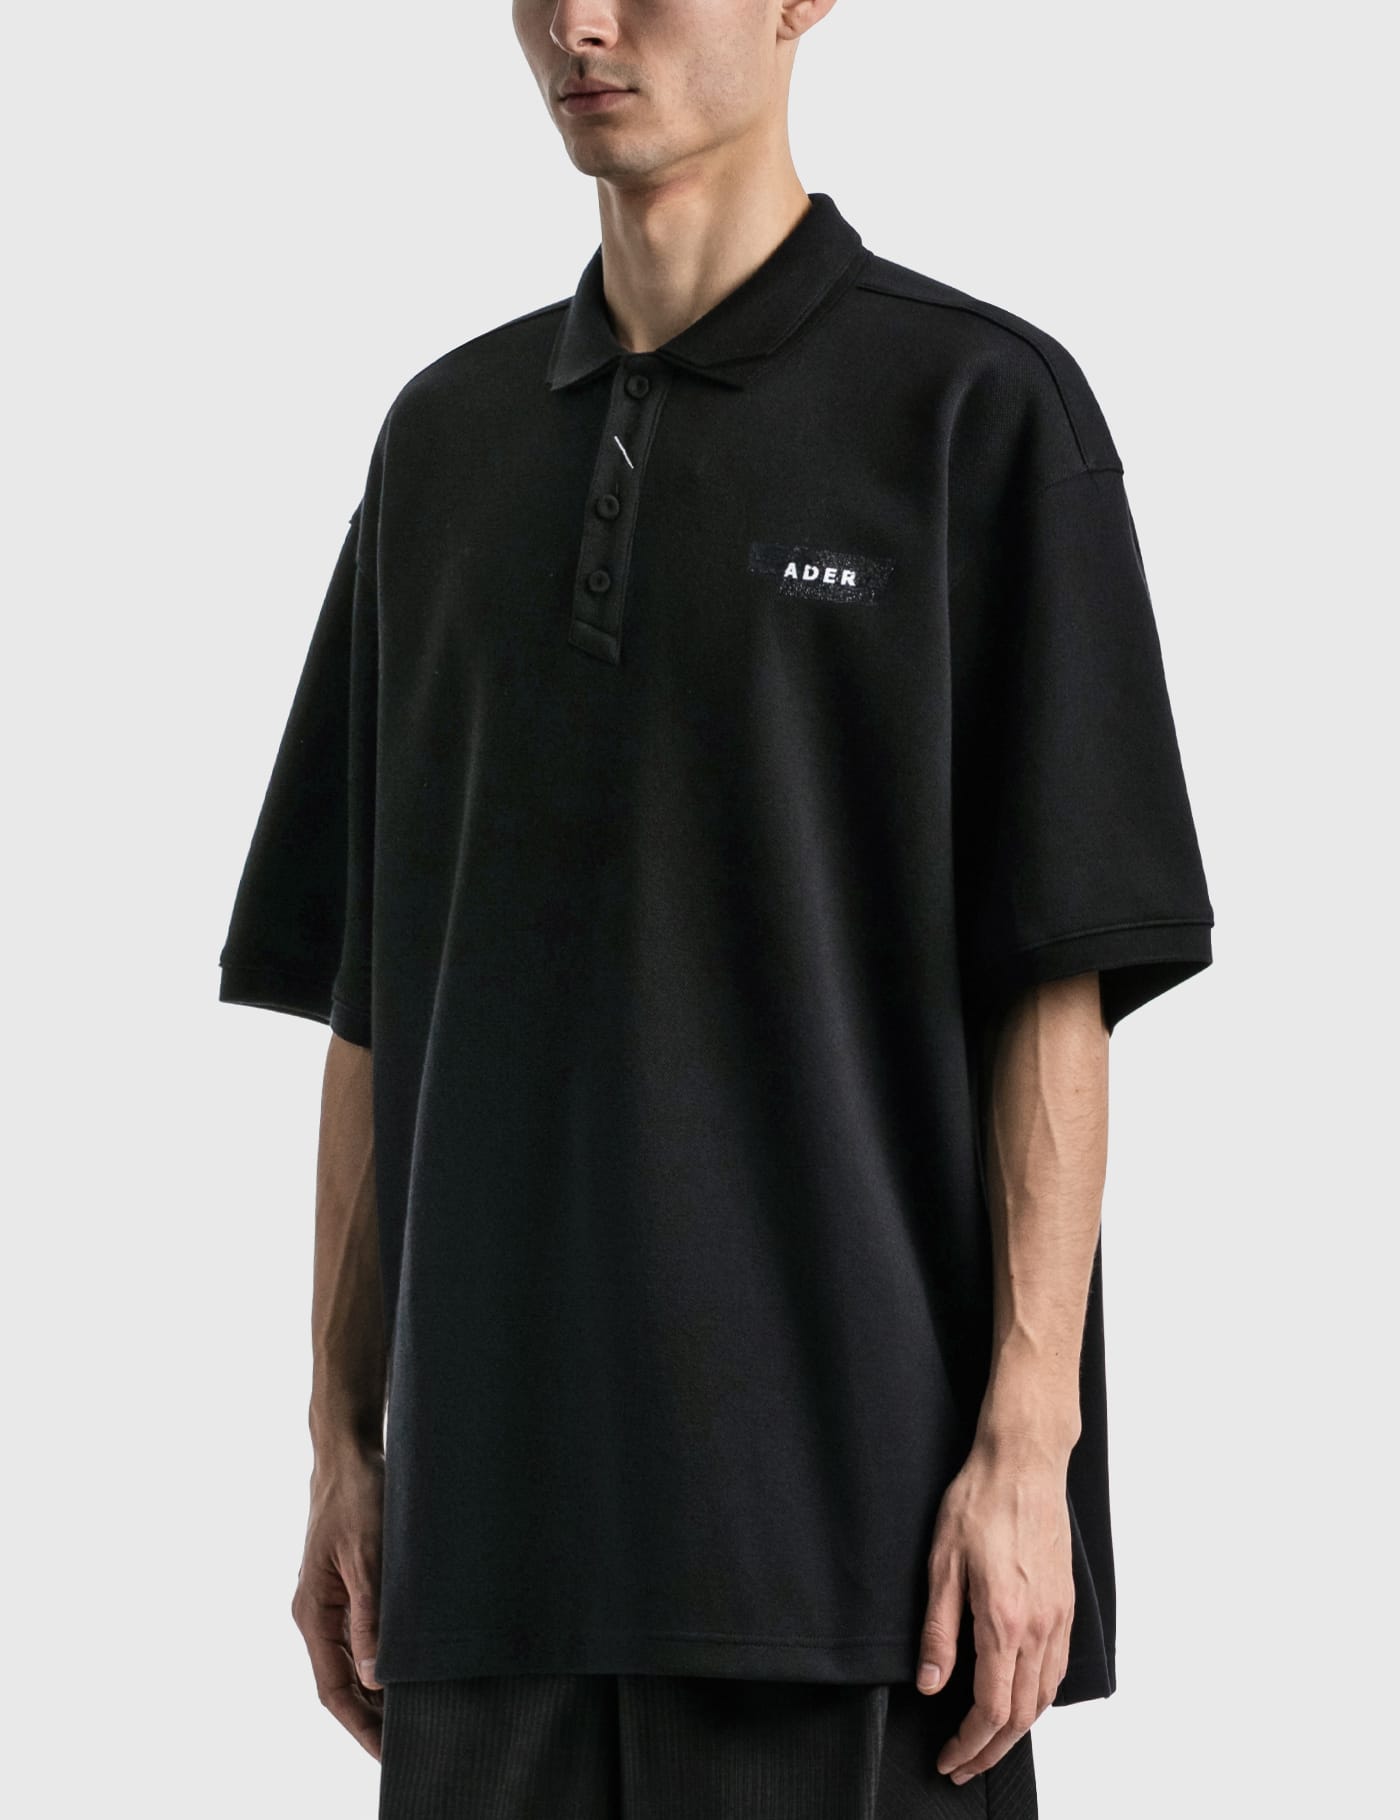 Ader Error - Duct Tape Logo Polo Shirt | HBX - Globally Curated 